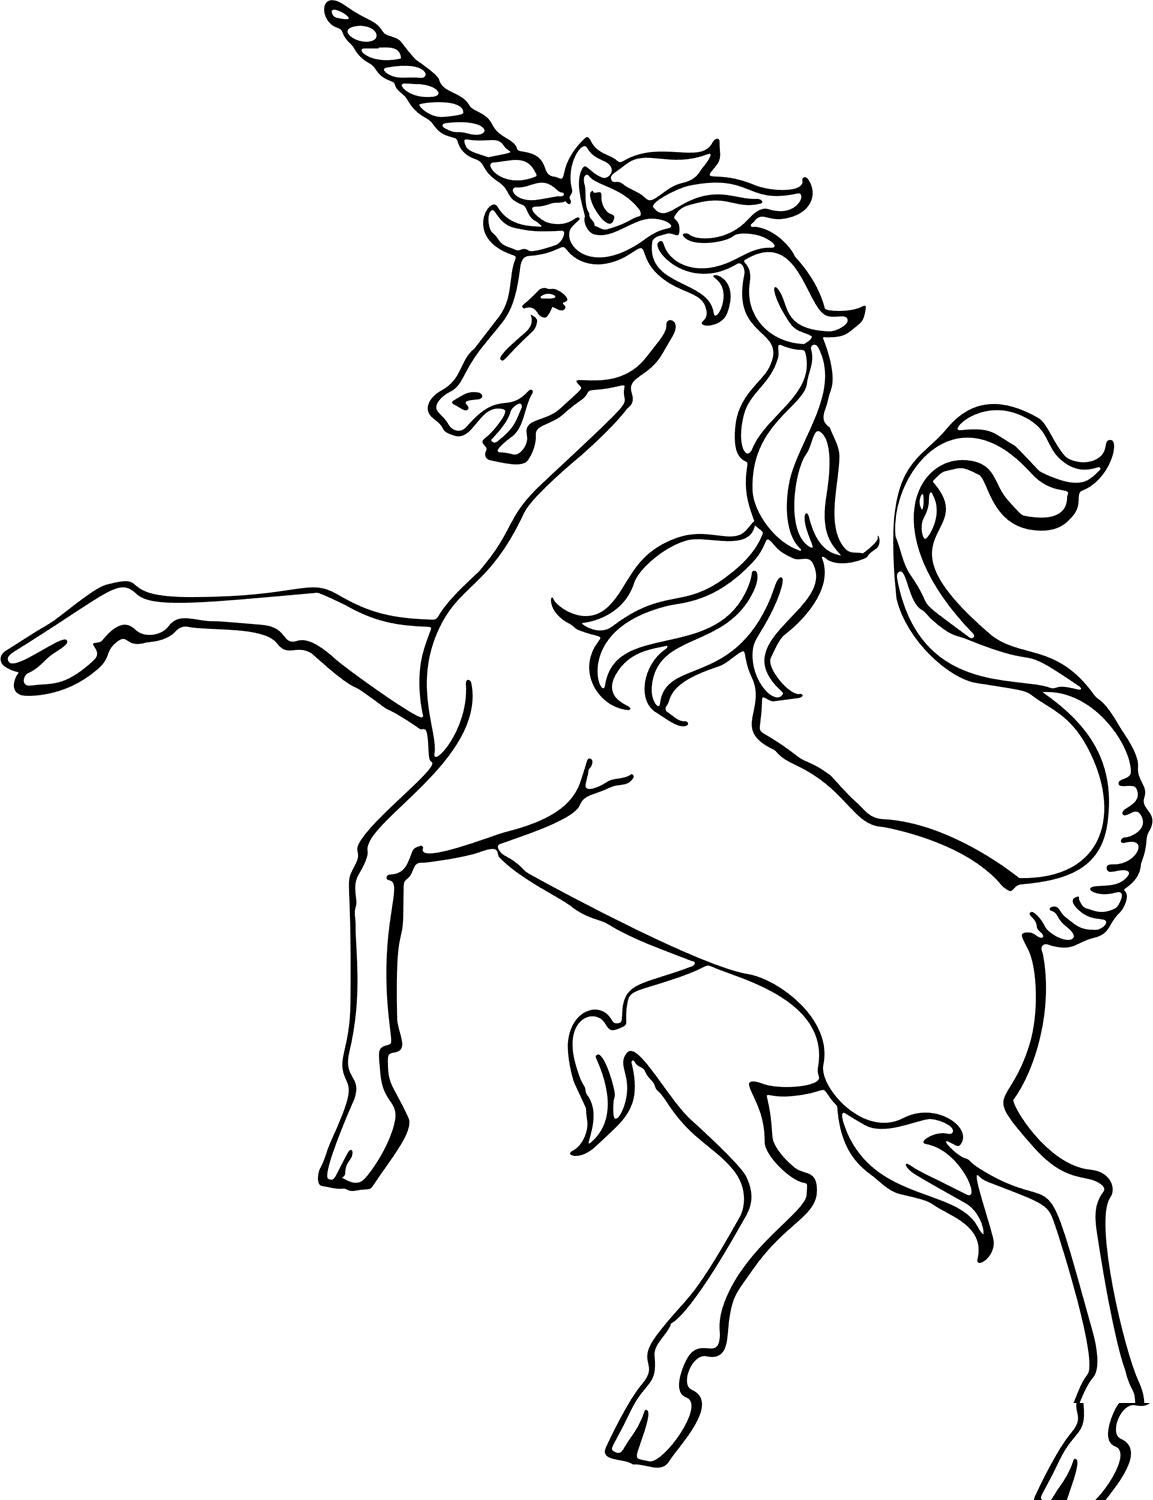 Vintage Unicorn Coloring Pages   Coloring Cool